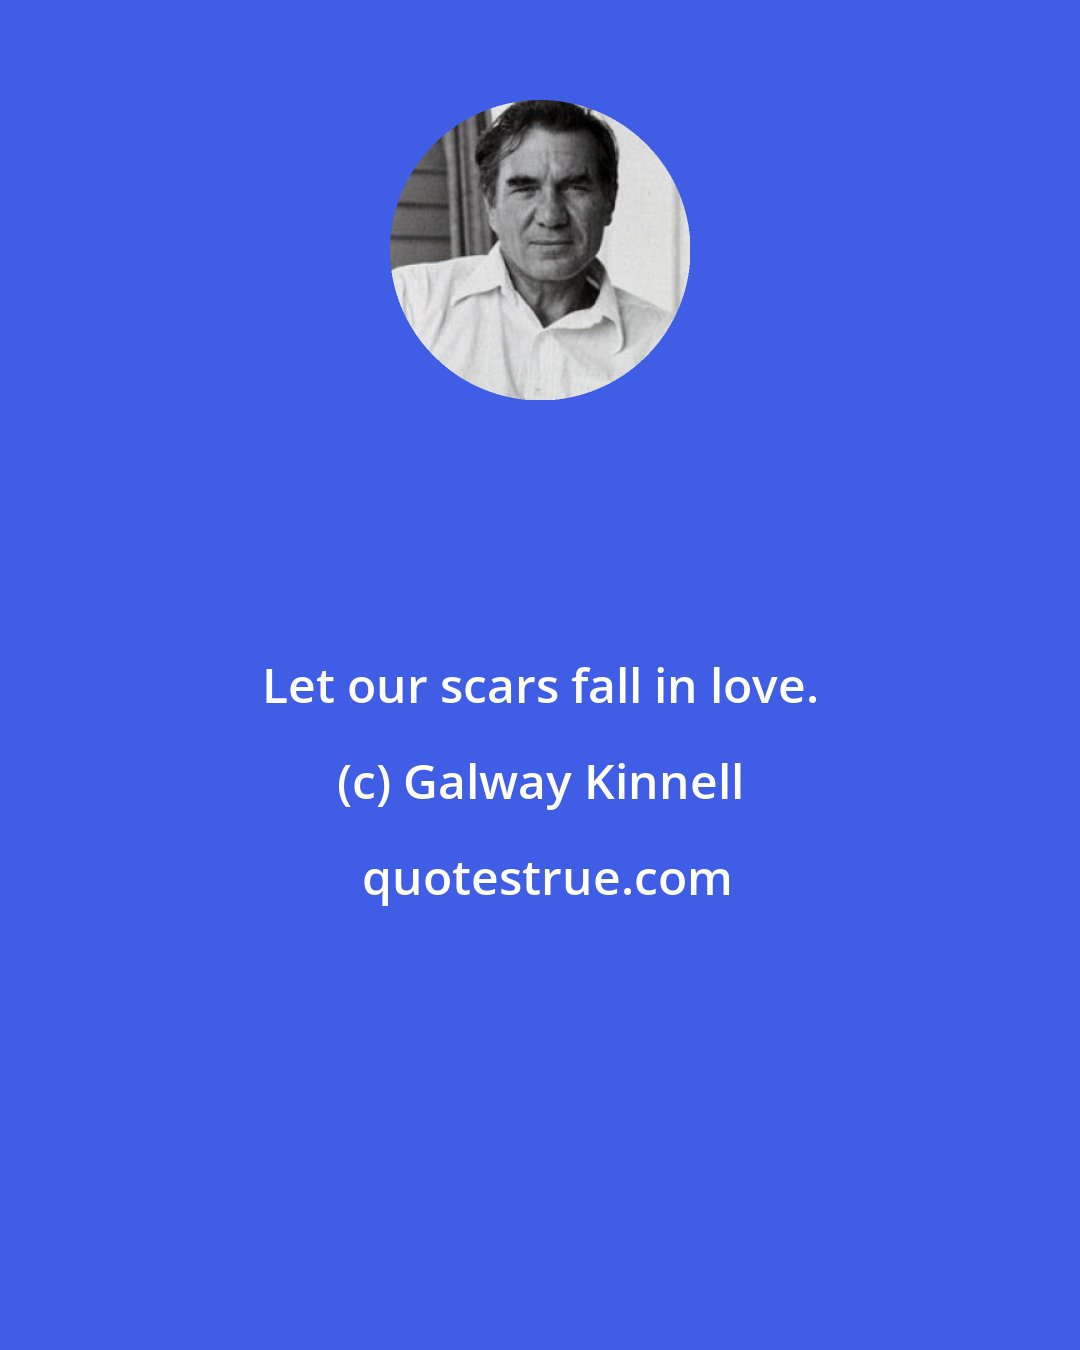 Galway Kinnell: Let our scars fall in love.